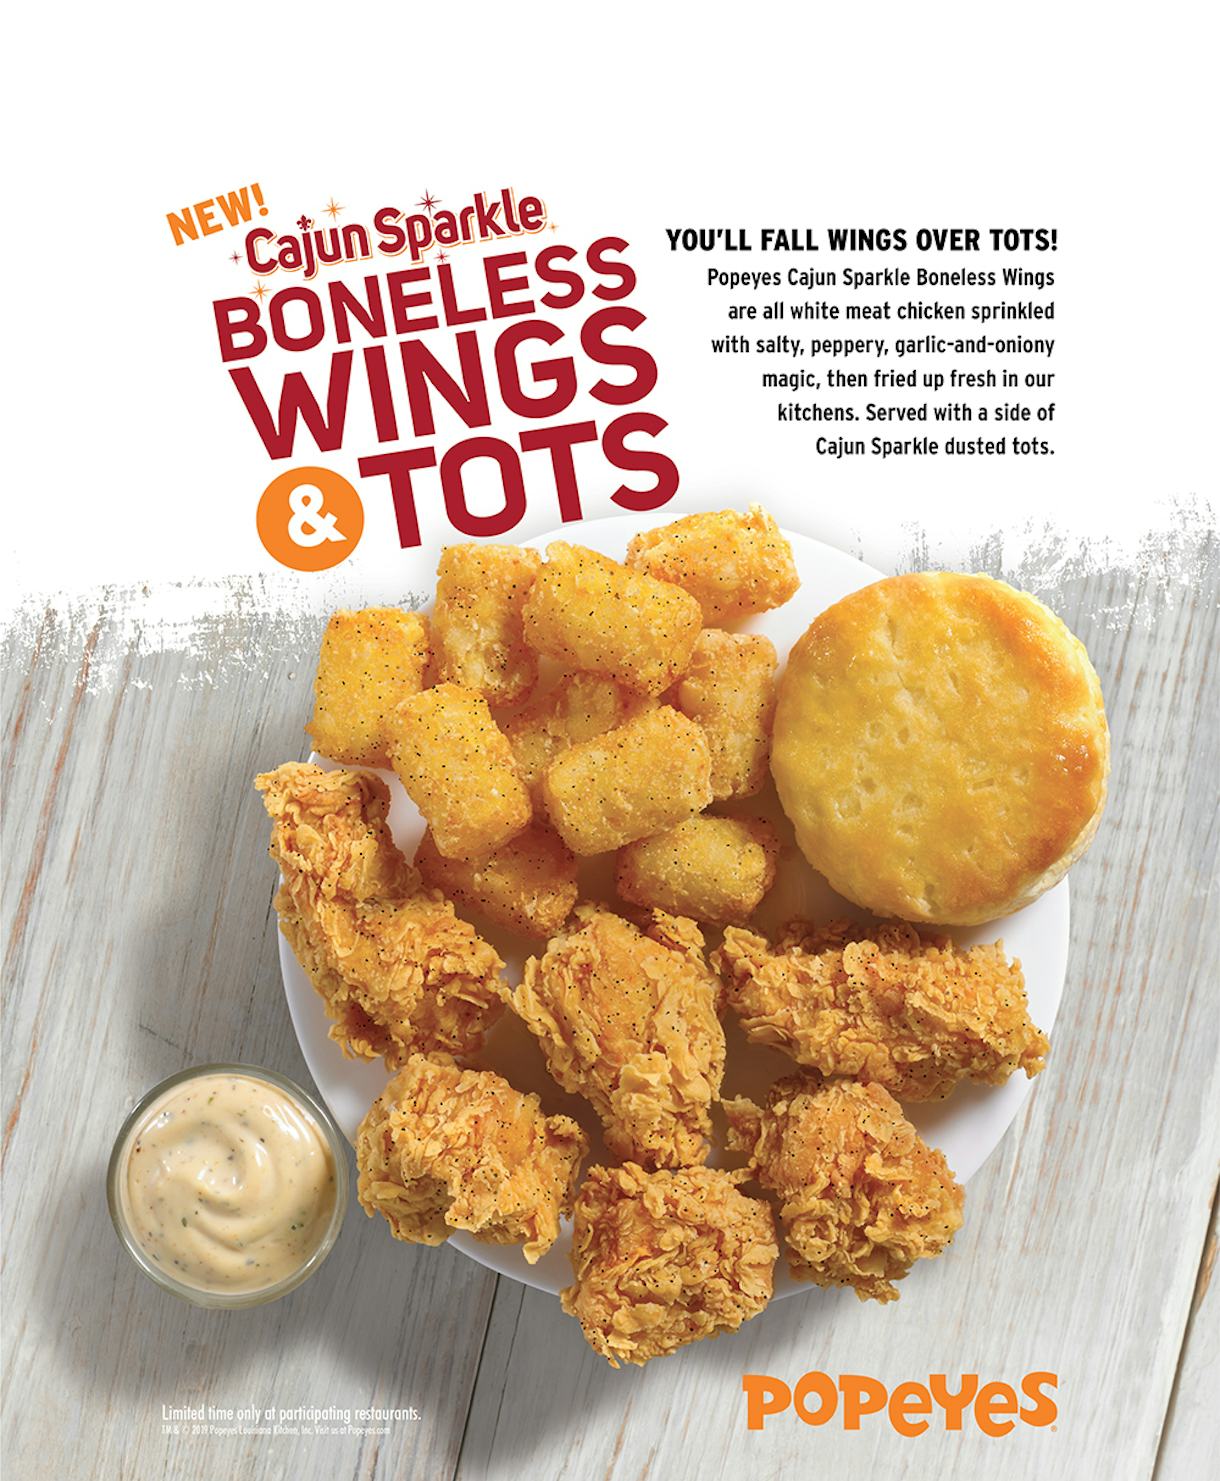 Popeyes' New Cajun Sparkle Boneless Wings & Tots Are Covered In Your